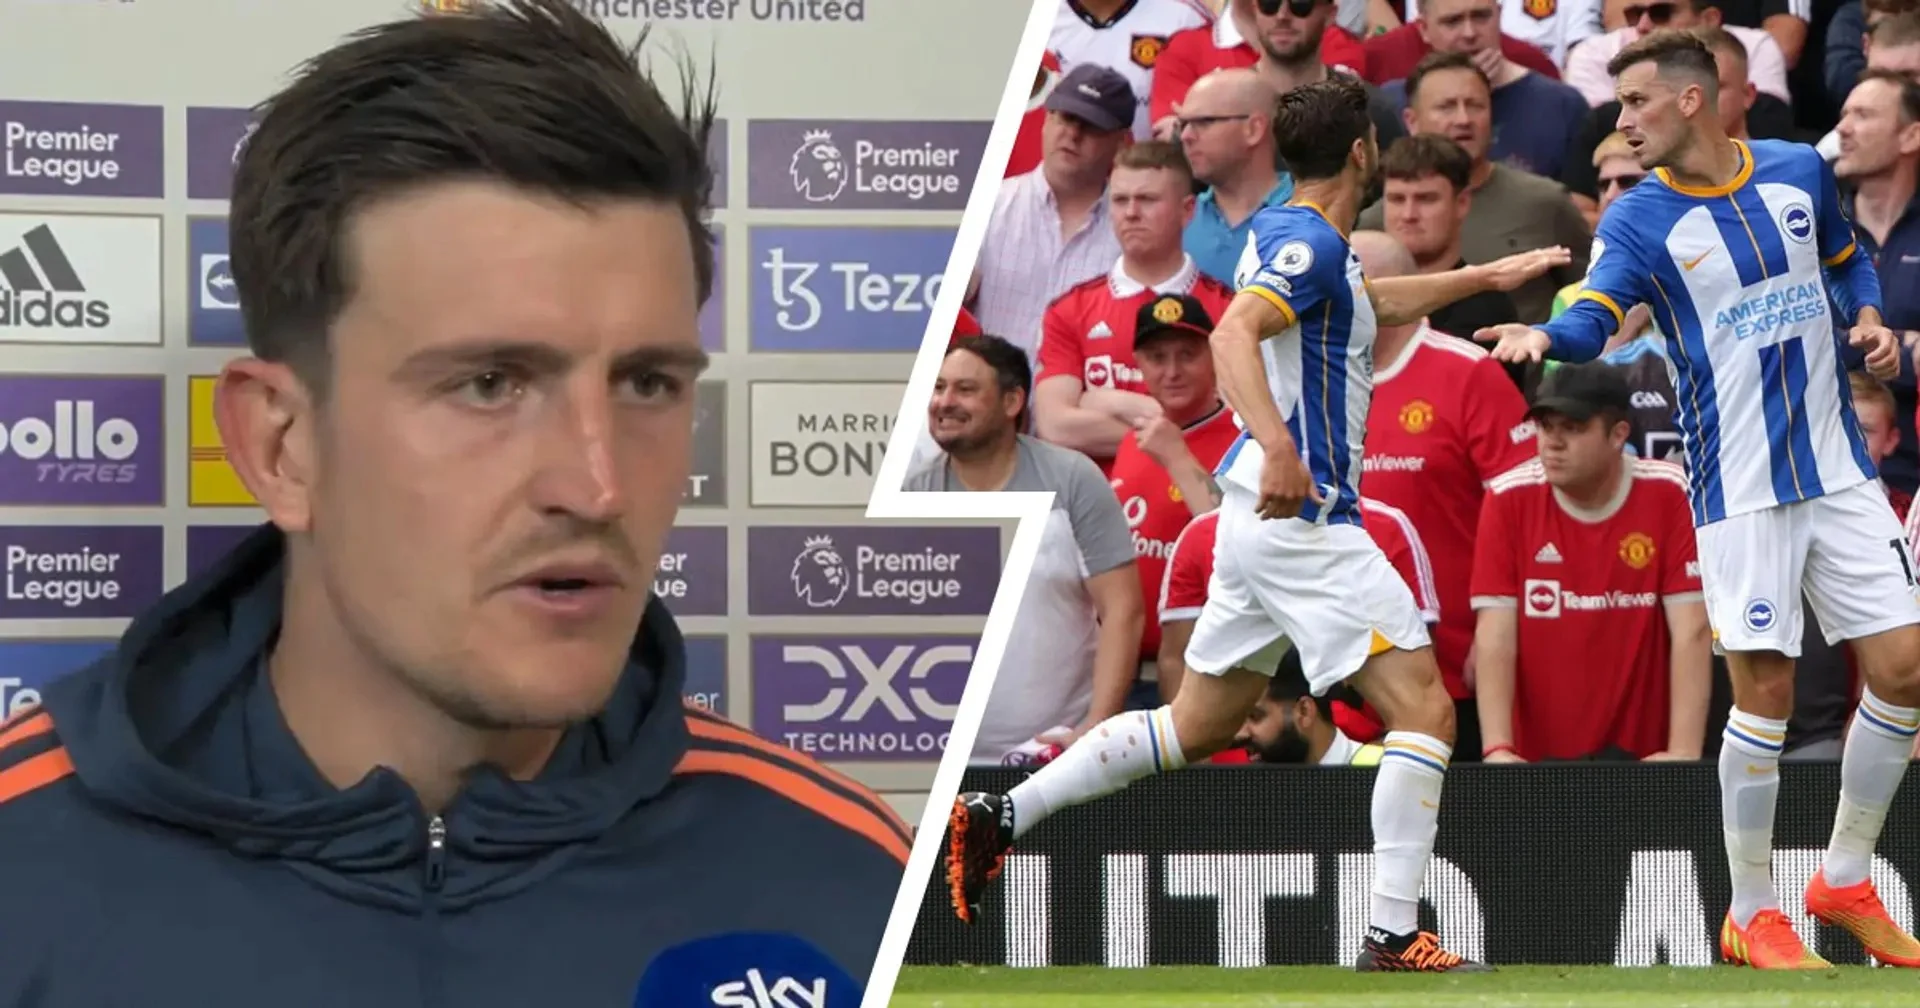 Maguire: 'It's the worst possible start. Me and Martinez not on the same wavelength'